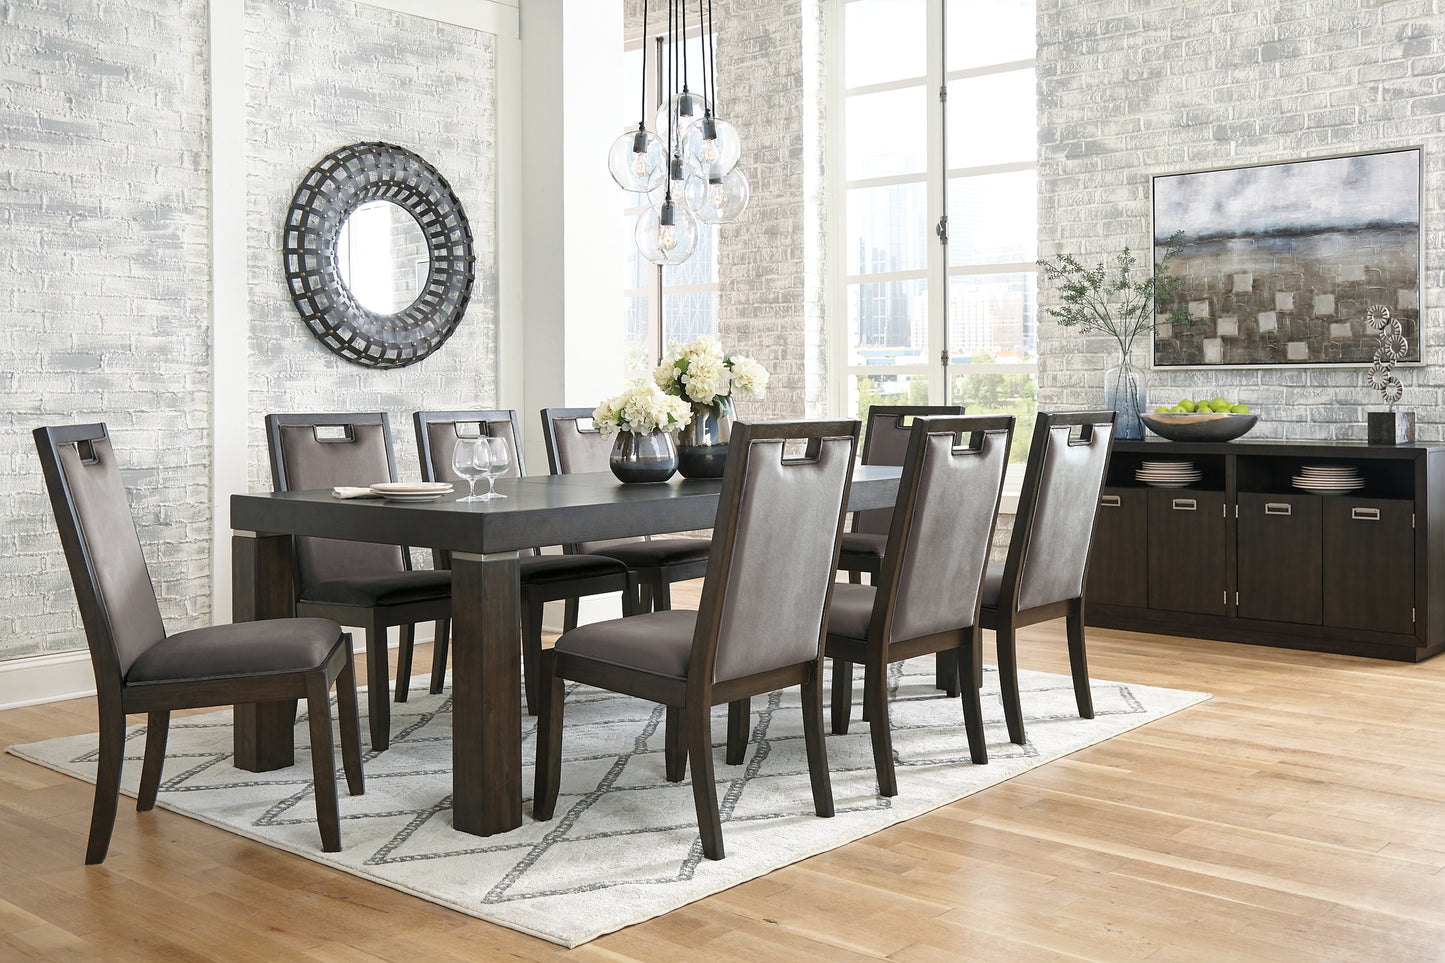 Hyndell Dining Table and 8 Chairs with Storage Wilson Furniture (OH)  in Bridgeport, Ohio. Serving Bridgeport, Yorkville, Bellaire, & Avondale